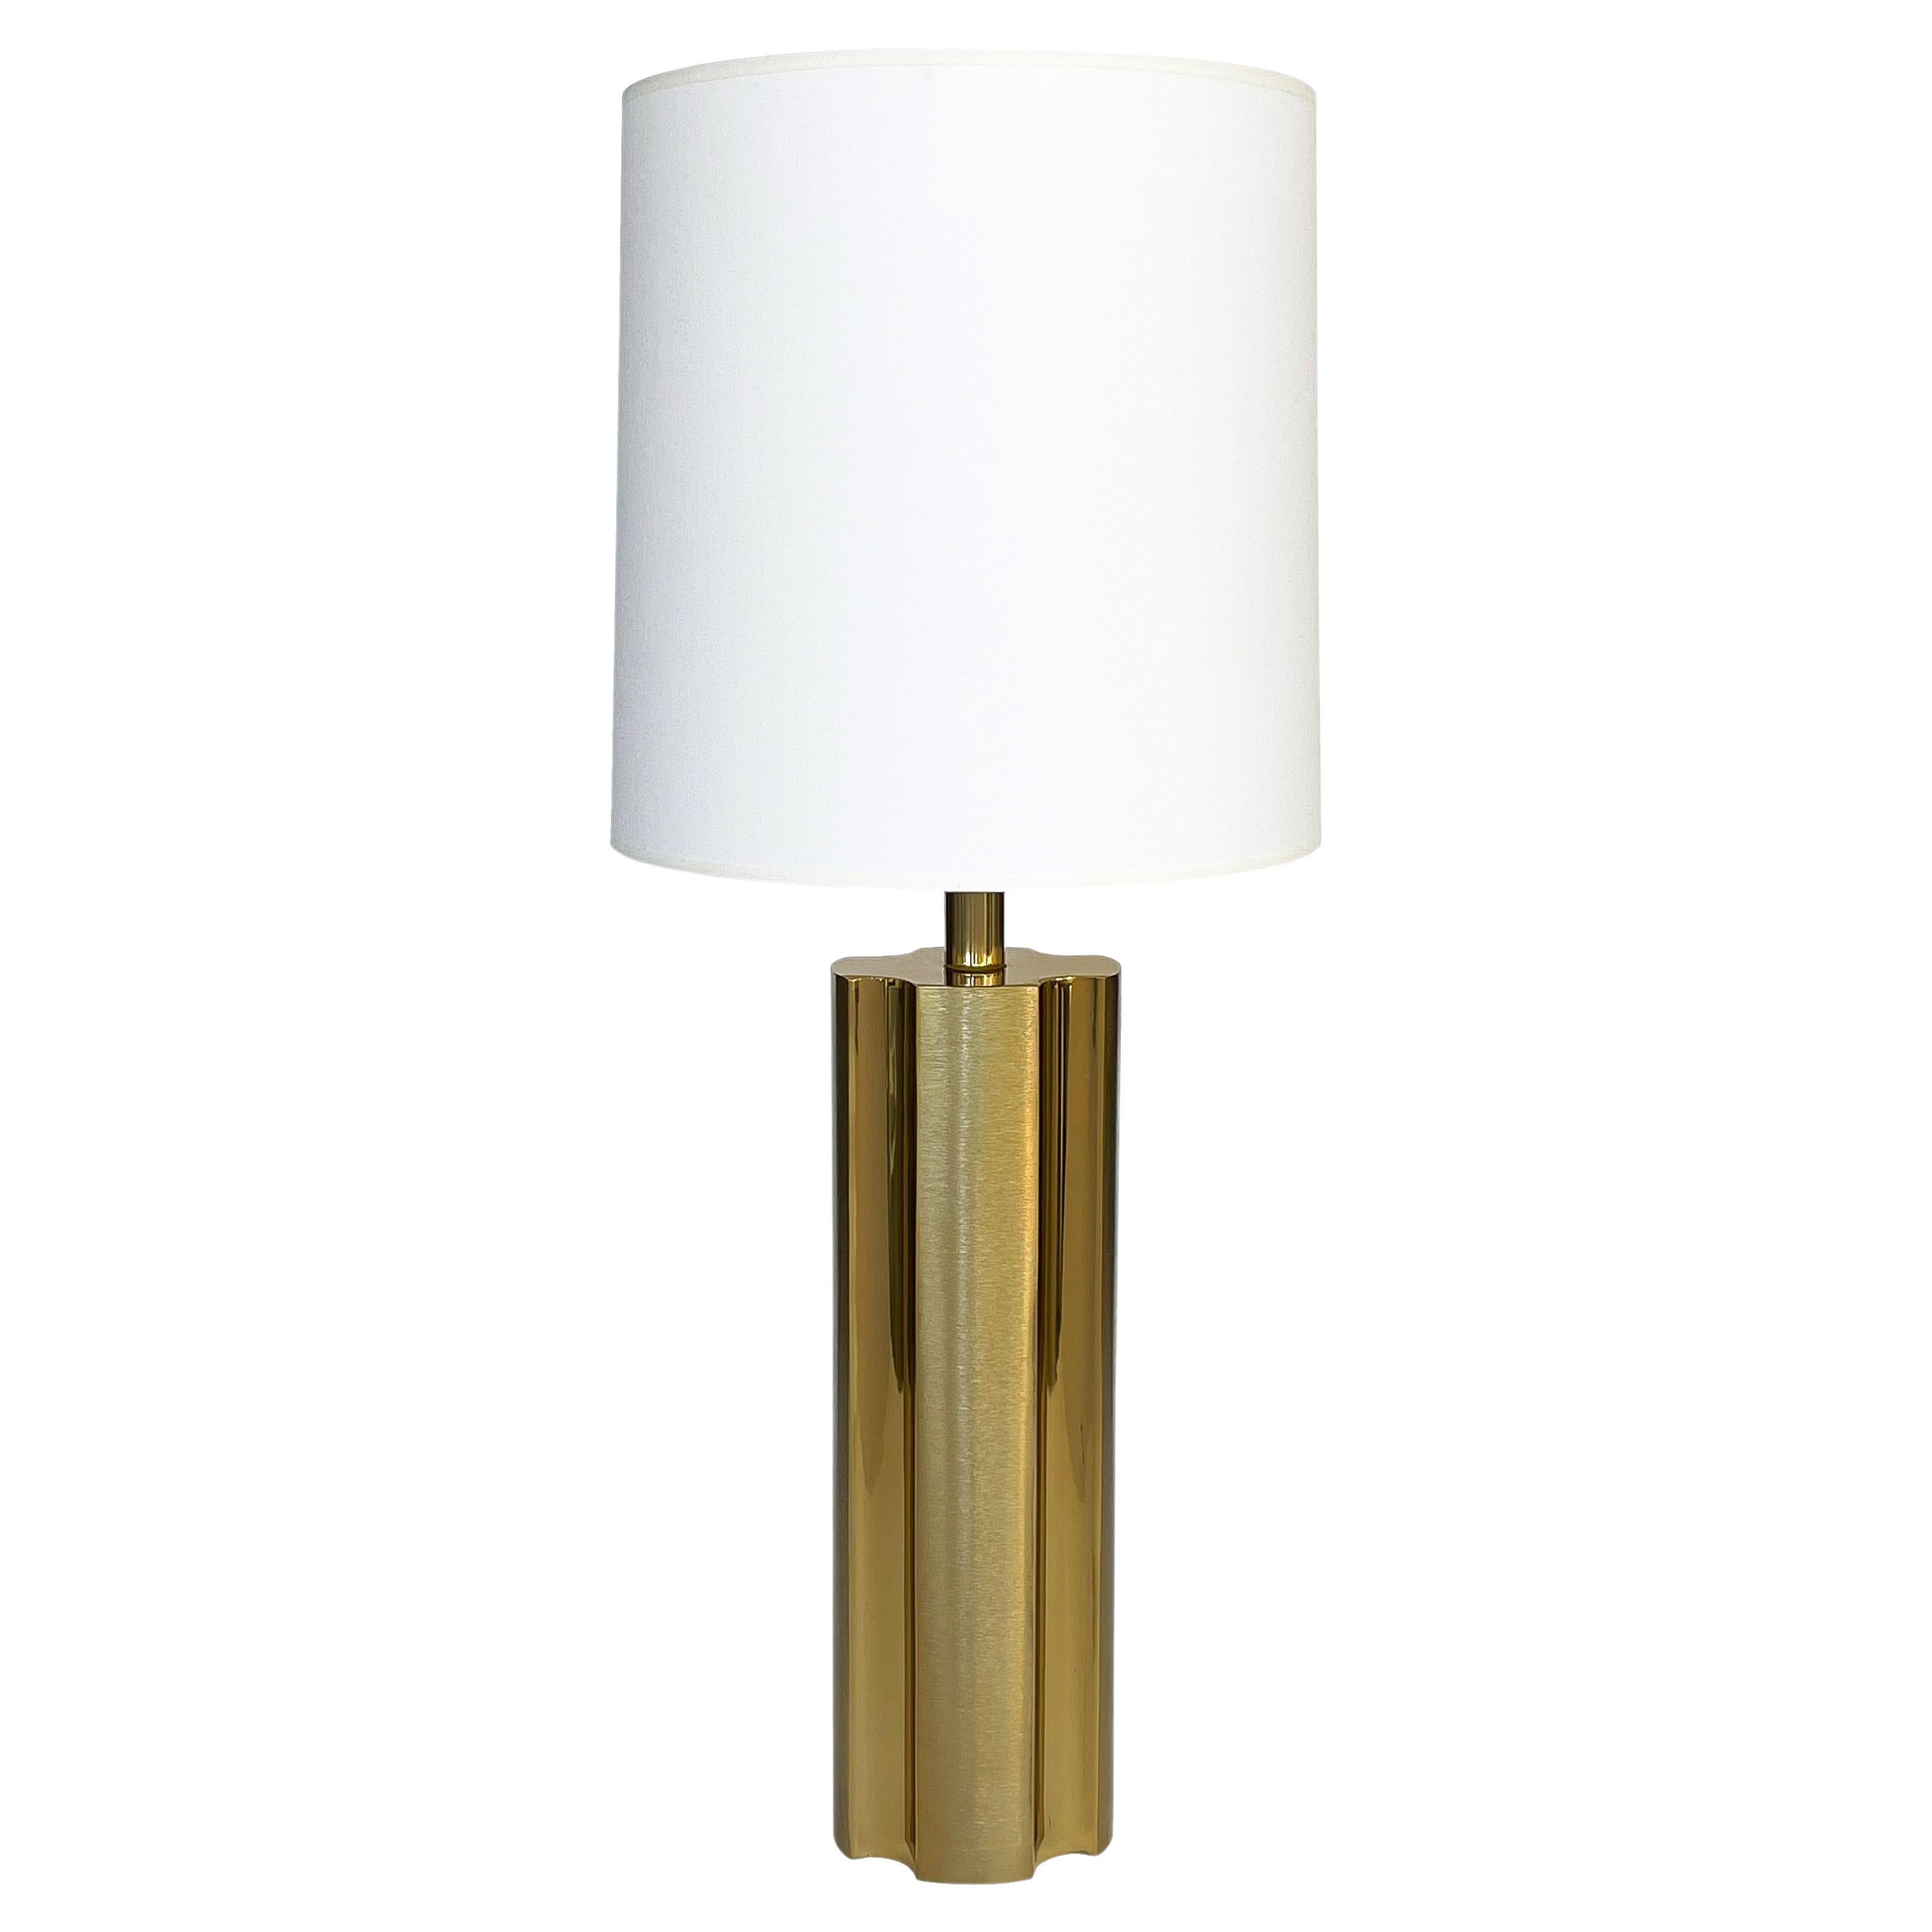 Modernist Brushed and Polished Brass Table Lamp by Laurel